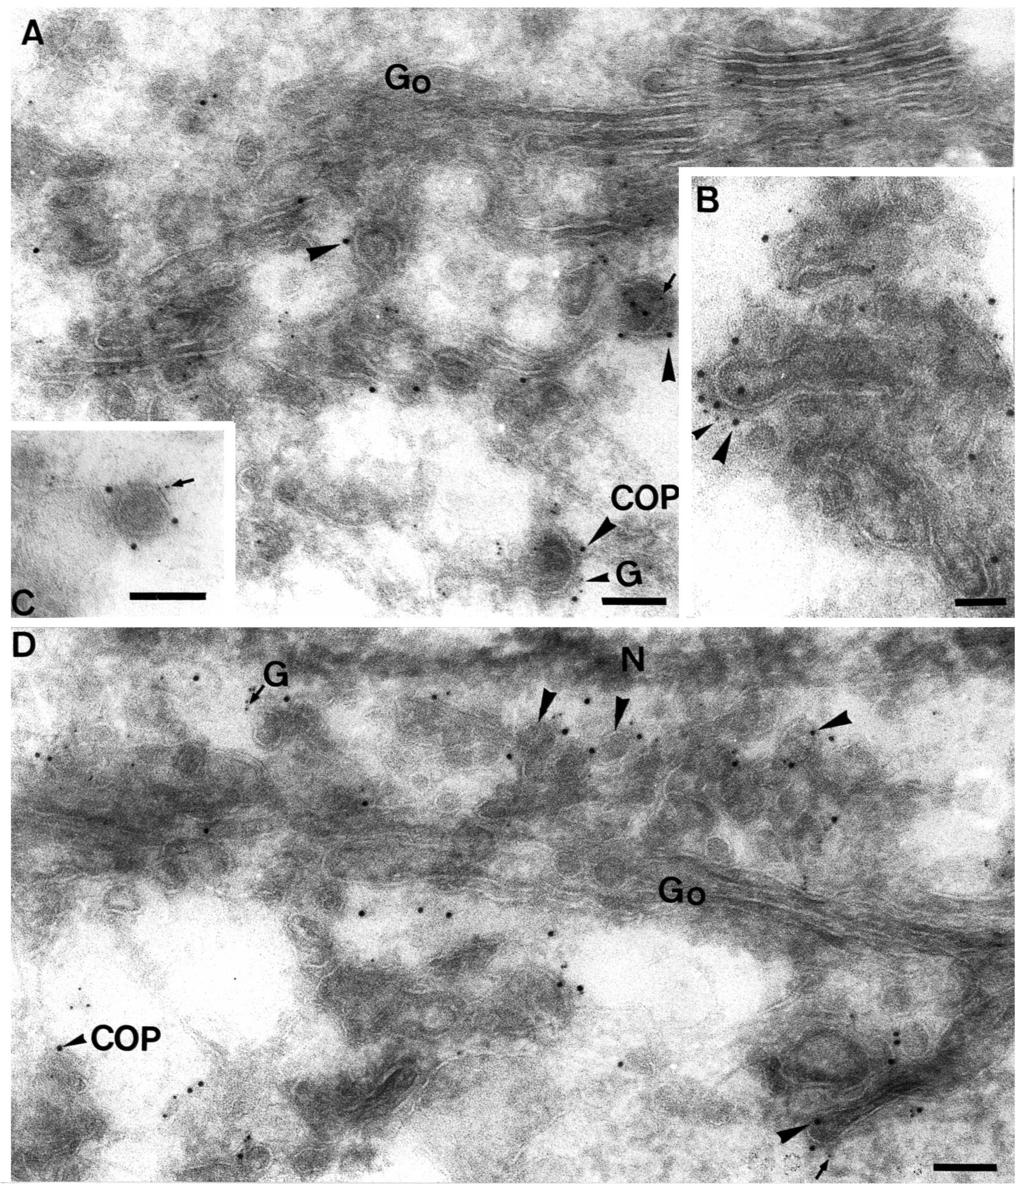 Immunocytochemical localization of β-cop 2849 Fig. 8. Co-localization of G protein and β-cop at 15 C. Following the 39.5 C treatment infected vero cells were shifted to 15 C for 2 hours.